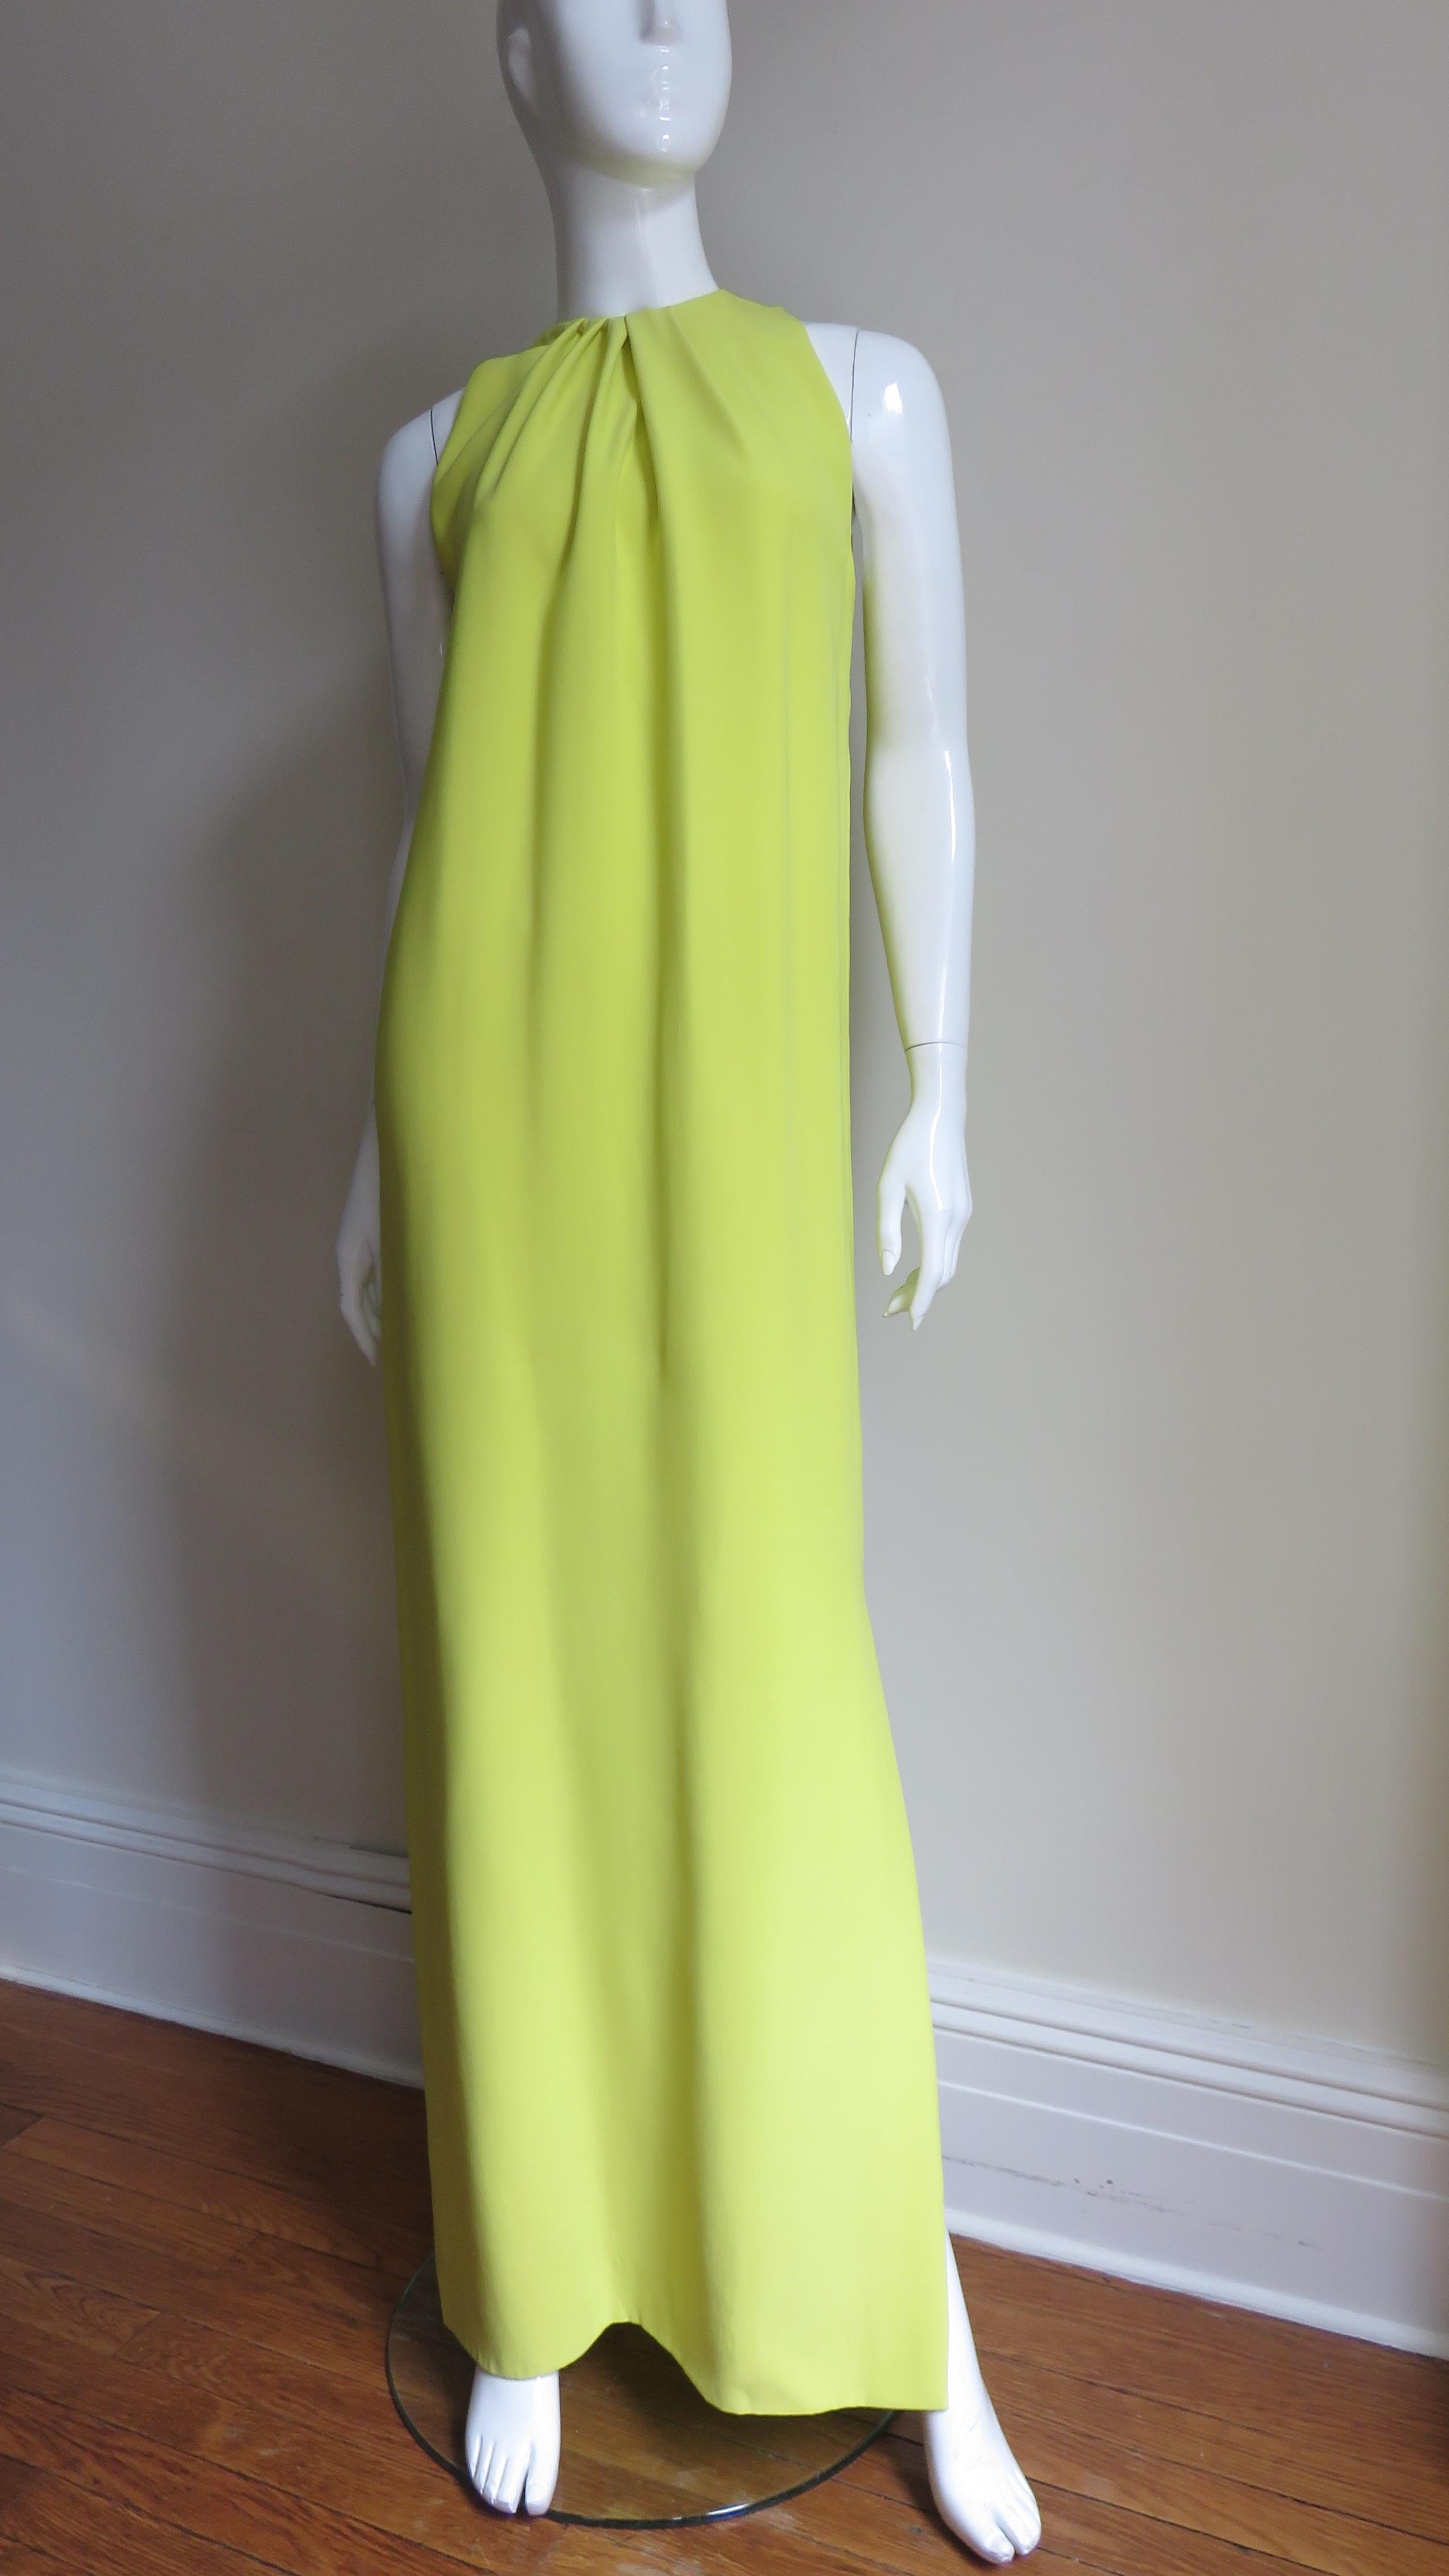 A beautiful bright citron silk gown from Christian Dior.  It has a crew neckline with inverted tucks around it's circumference opening to create fullness- simple and elegant.  It is lined in citron silk and has a matching invisible back zipper. 
New